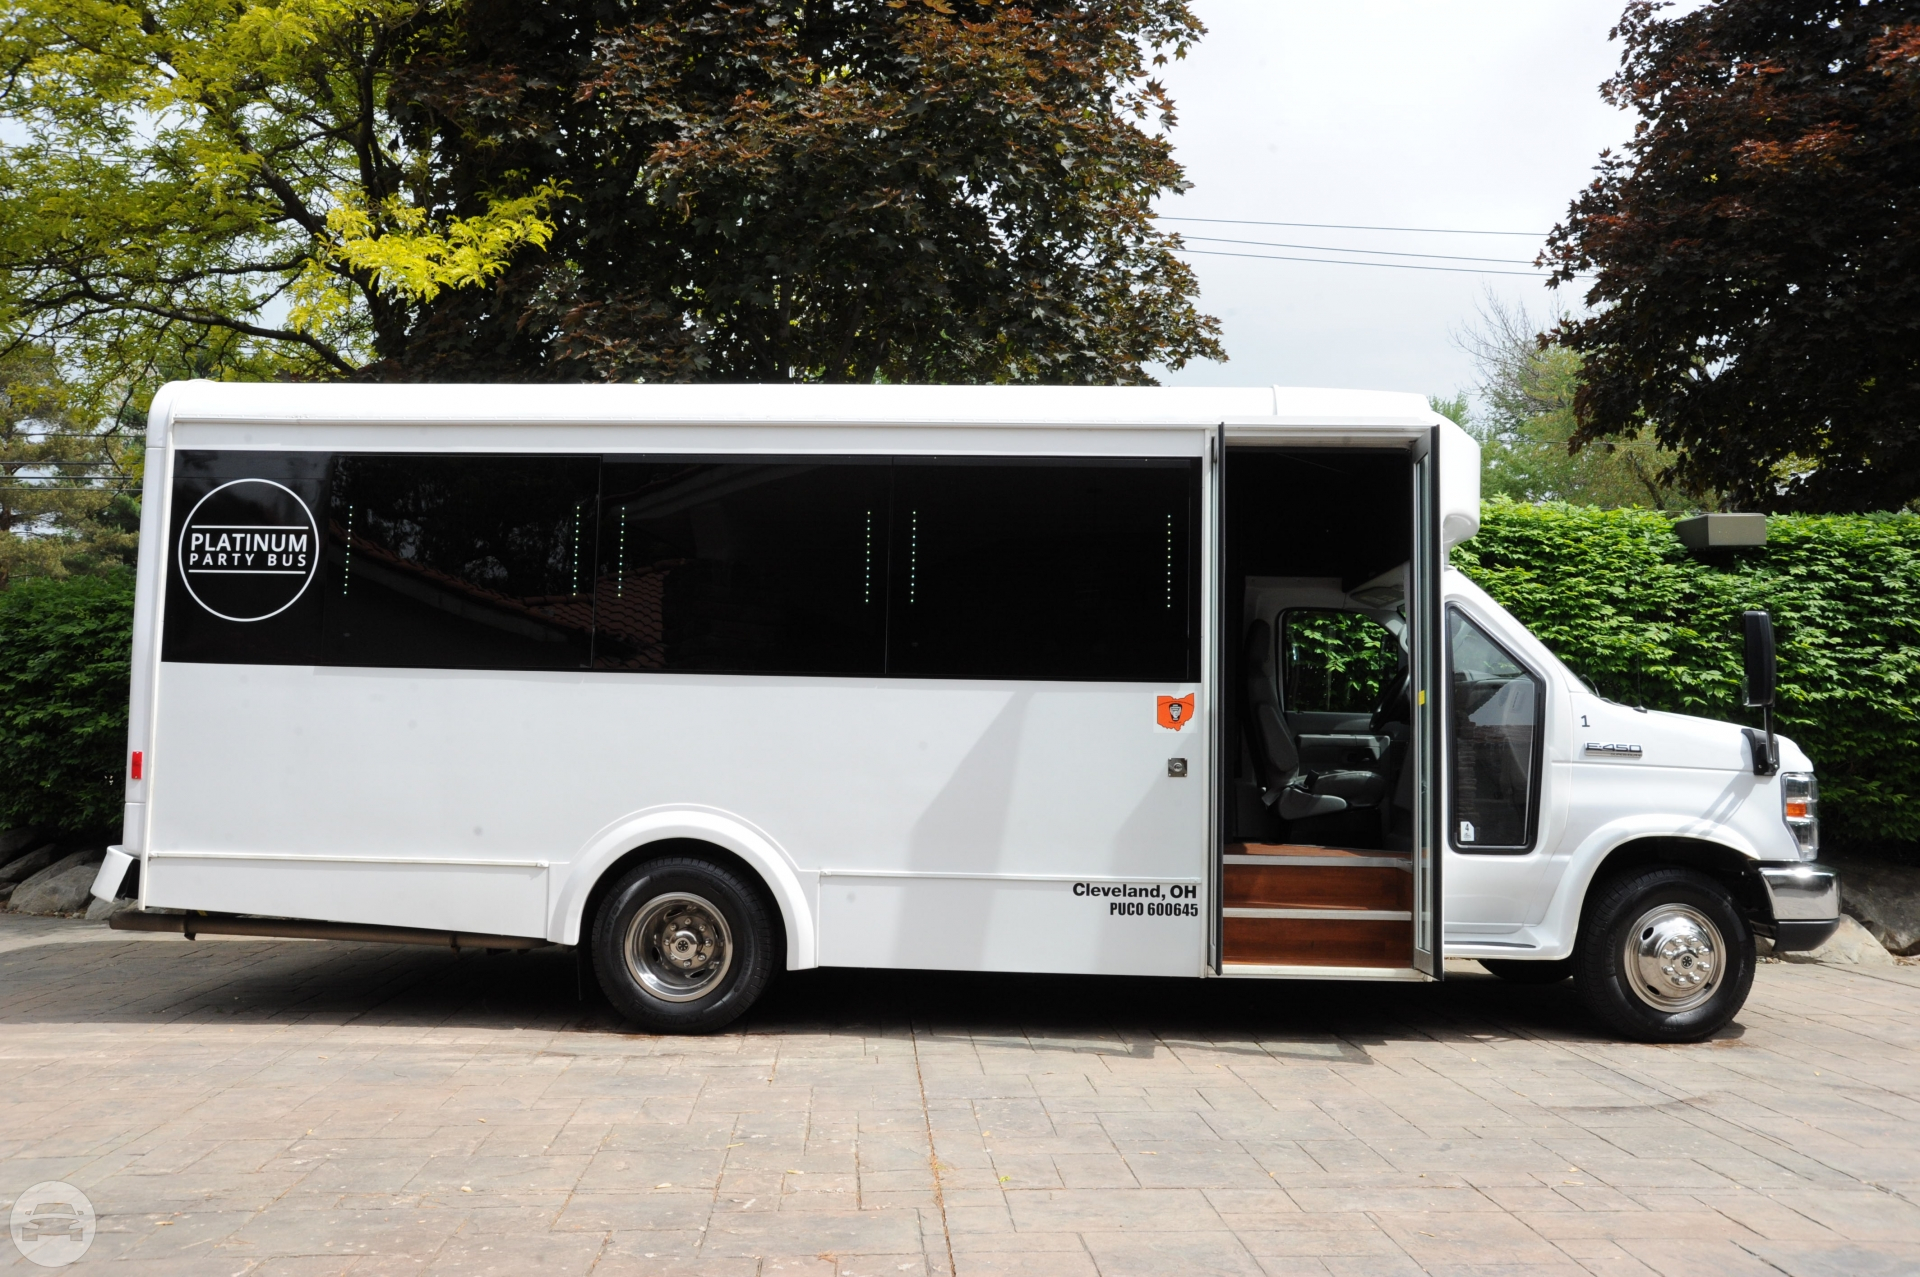 16 passenger Luxury Party Bus
Party Limo Bus /
Cleveland, OH

 / Hourly $90.00
